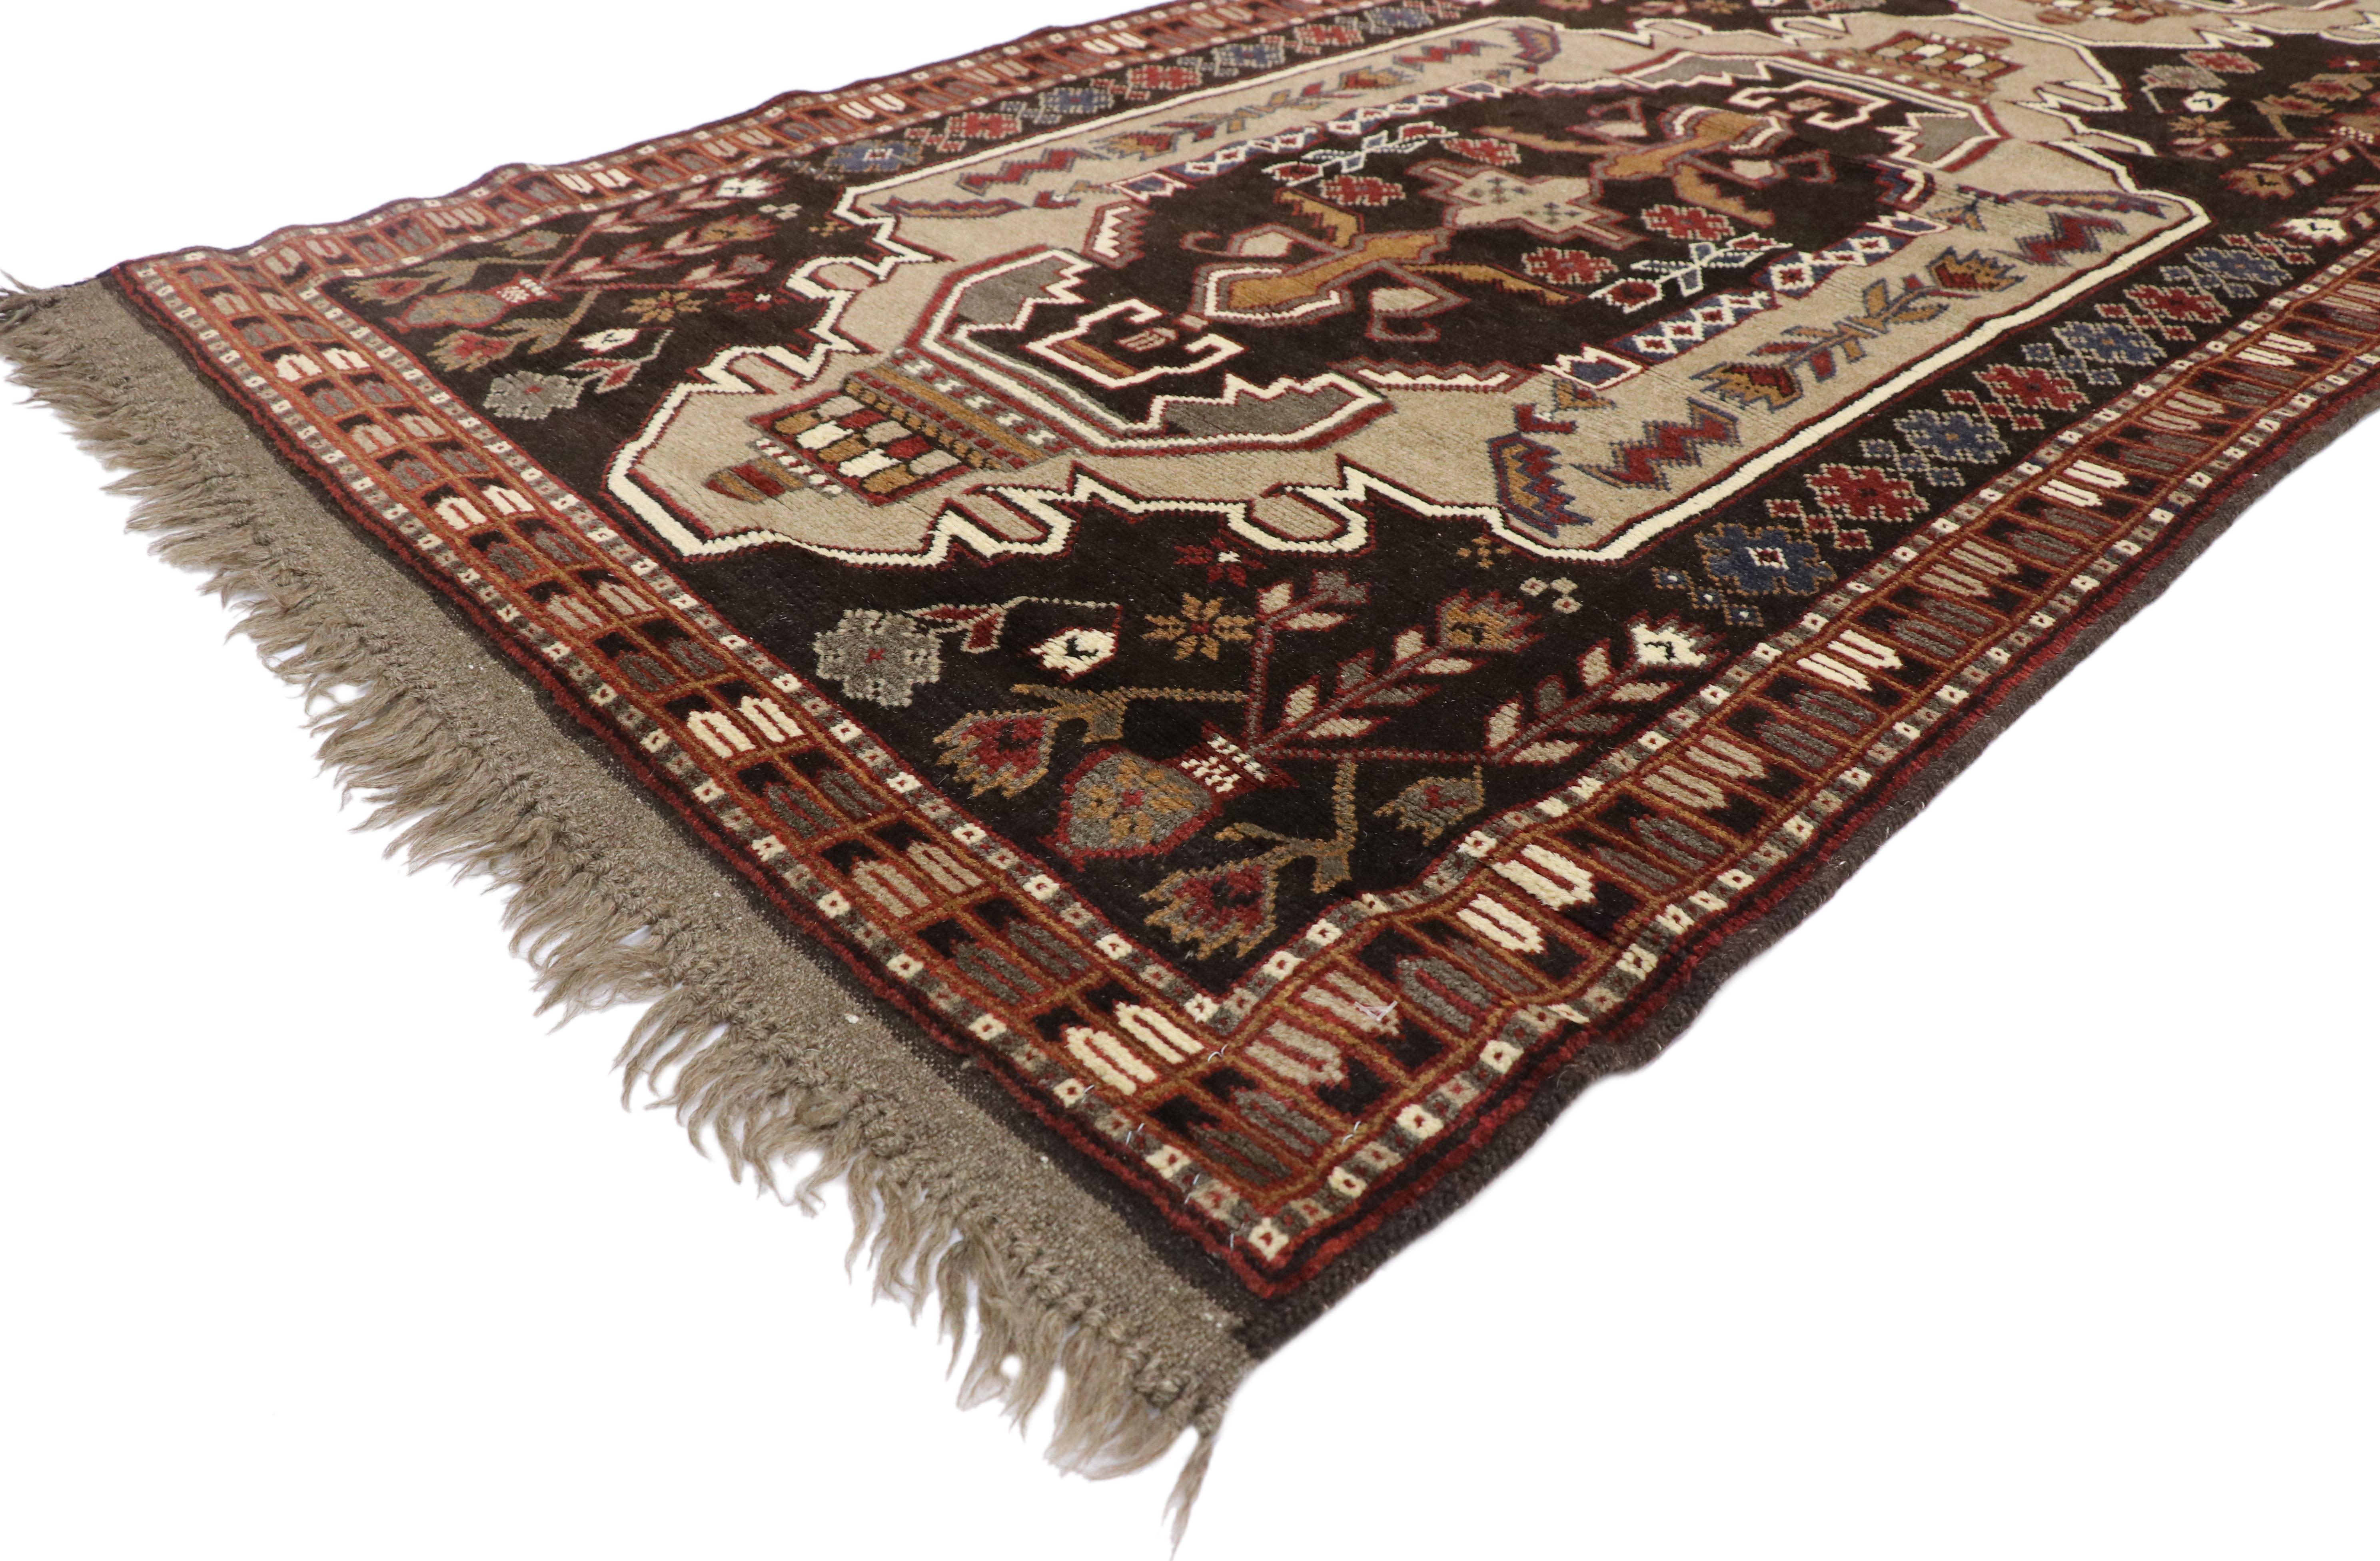  72353 Vintage Afghani Hallway Runner with Tribal Vibes and Mid-Century Modern Style. Displaying Mid-Century Modern style and nomadic tribal vibes, this vintage hand-knotted wool vintage Afghan carpet runner is an amalgam of nomadic charm and